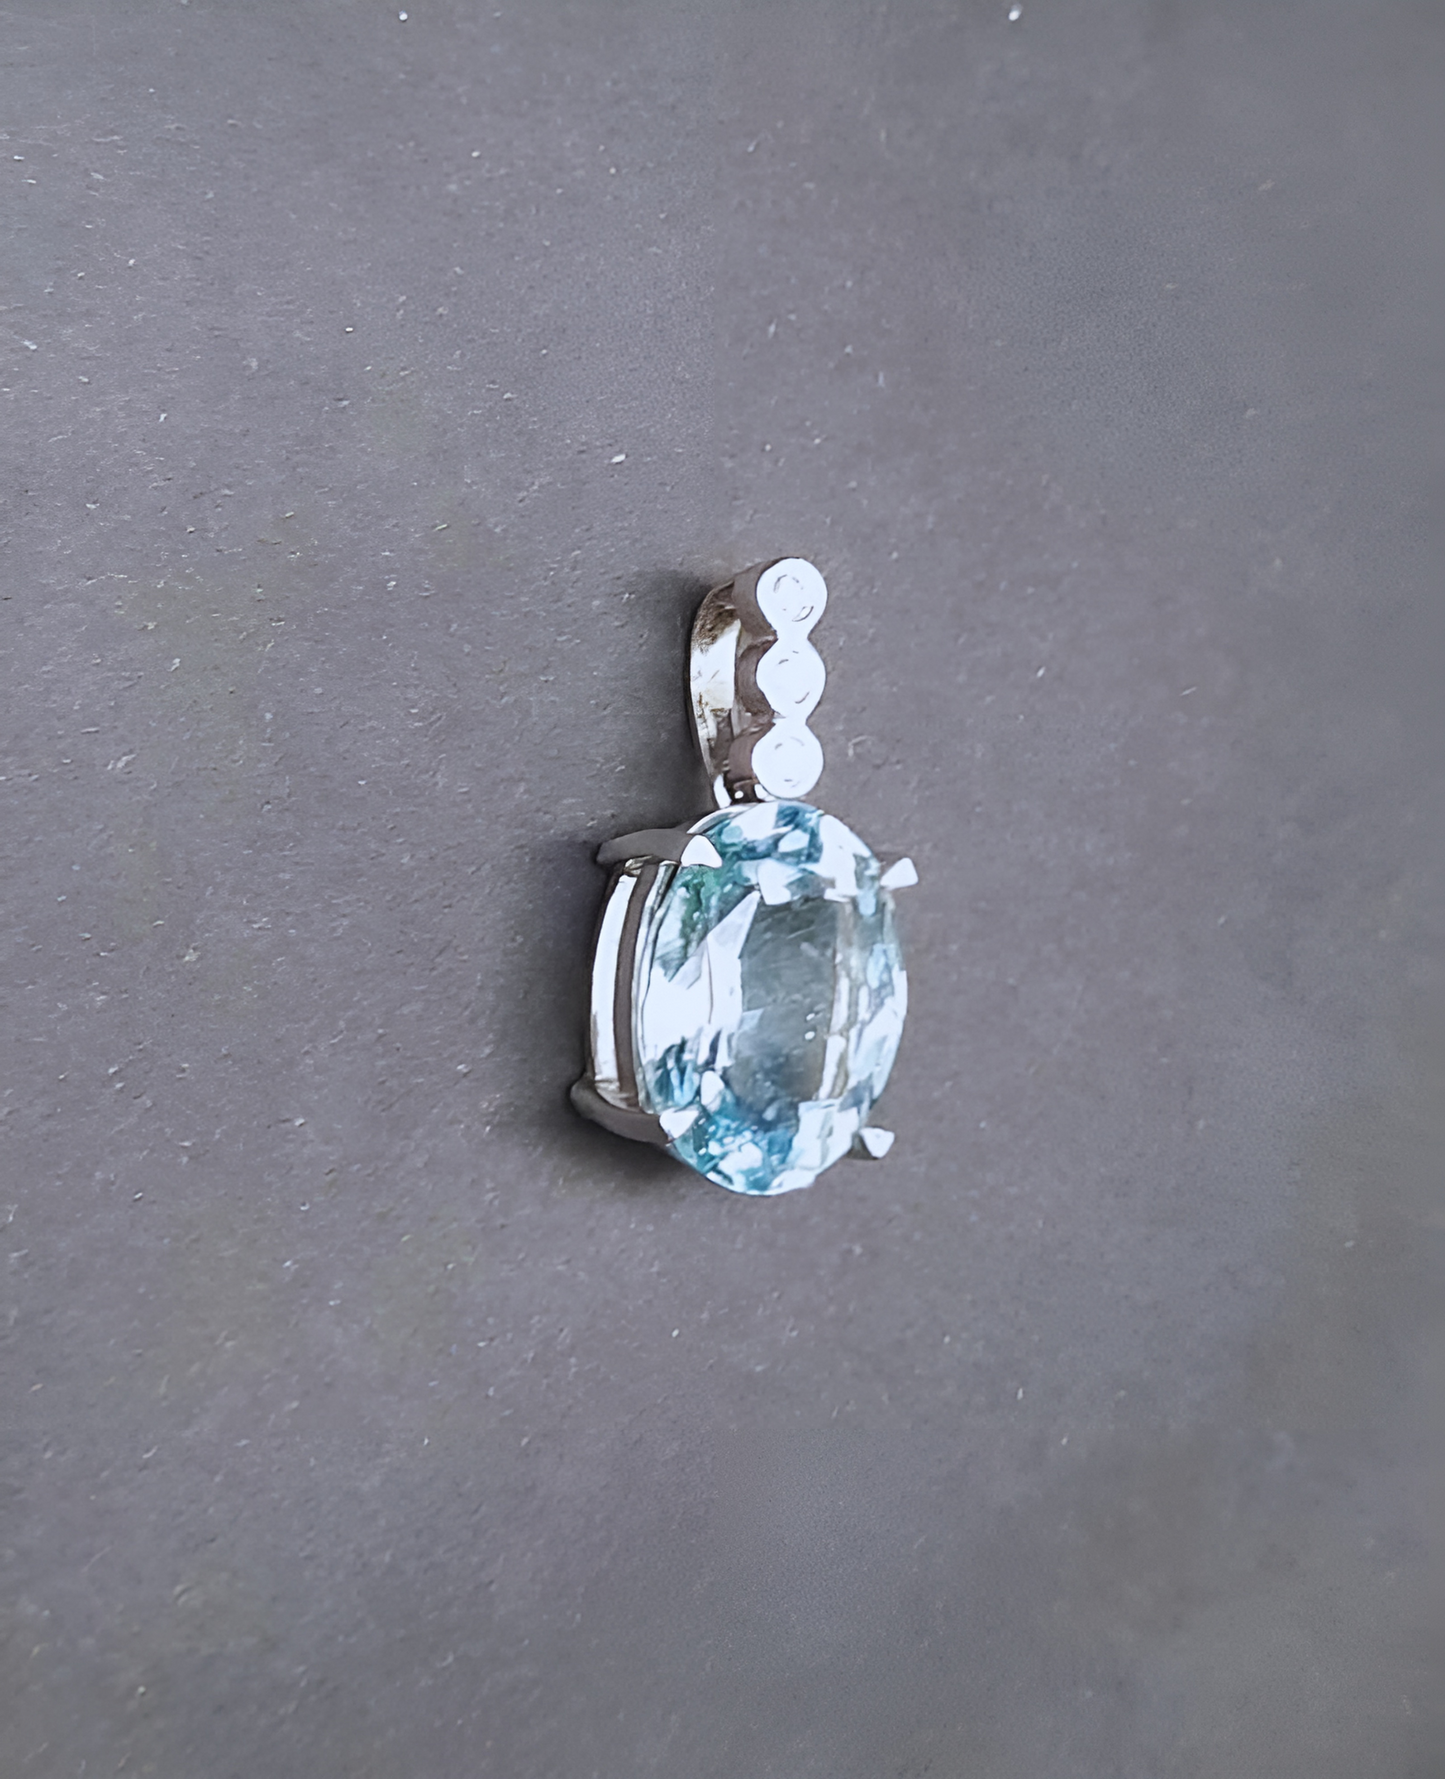 Handmade 18K white gold pendant for necklace with 3.54 ct. natural Aquamarine & natural Vvs1 high quality Diamonds.